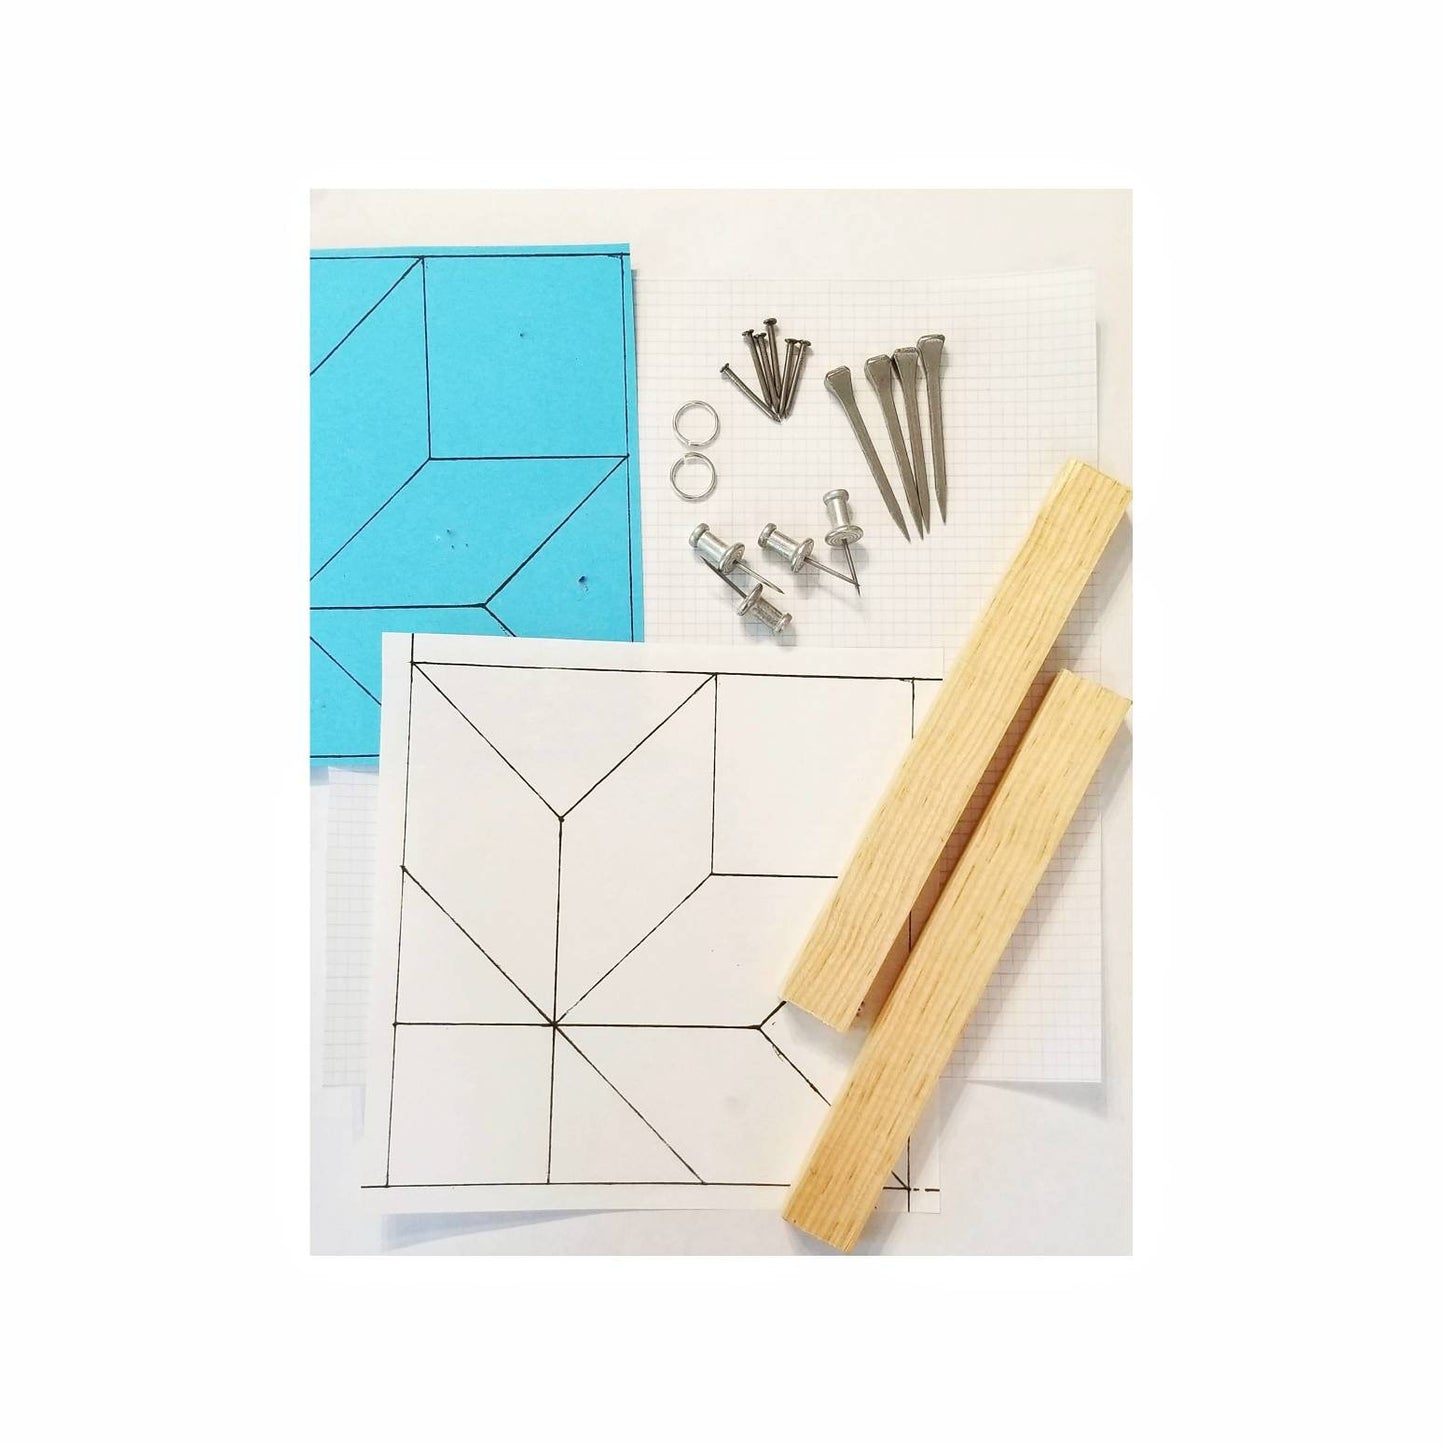 Beginner Stained Glass Pattern aid for Suncatchers. Create straight panels & squared up boxes. Wood stops, vellum graph paper, nails, rings.